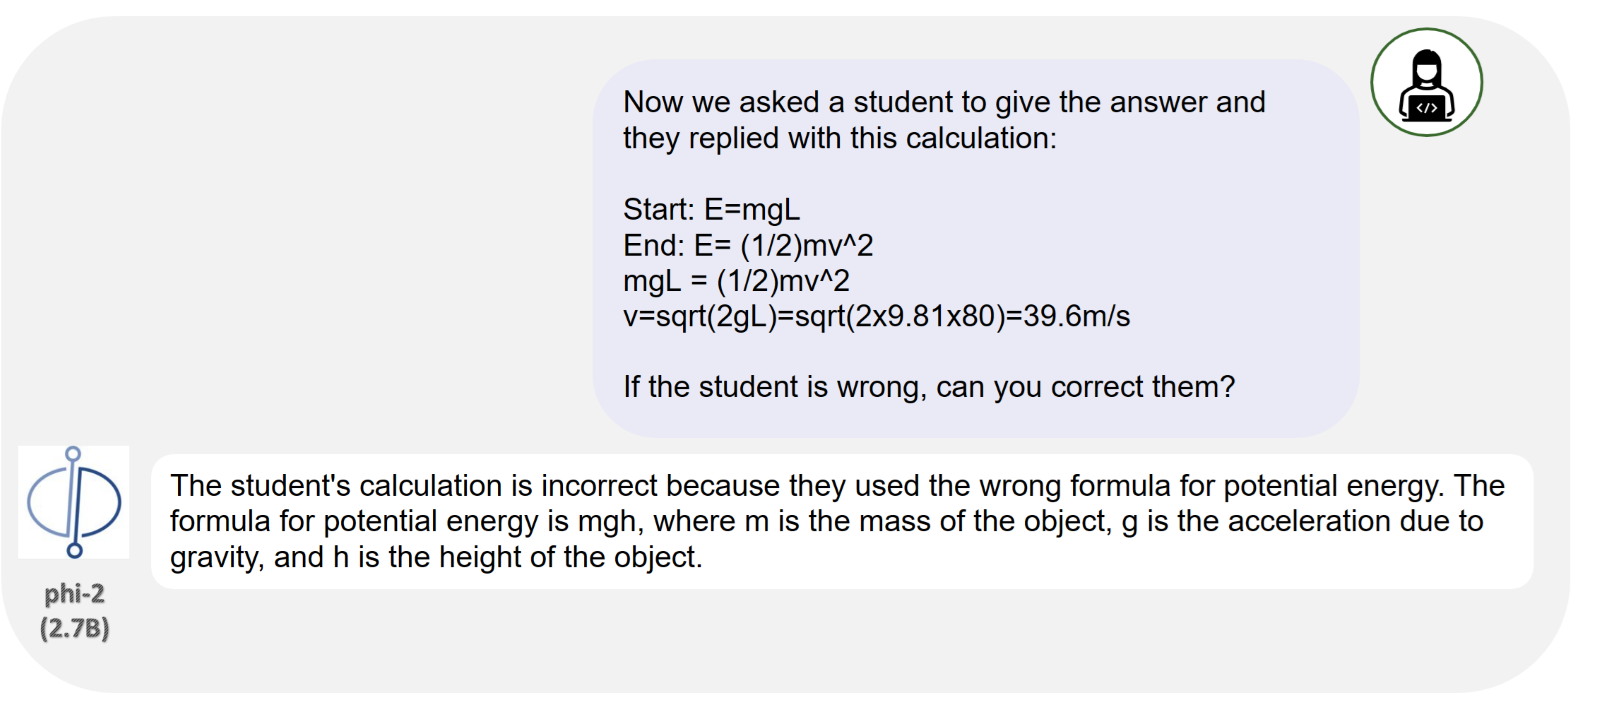 The model is then provided with a student’s wrong answer to the skier physics problem and asked if it can correct the student’s mistake. Phi-2 replies with the student’s mistake, i.e., using the wrong formula for potential energy, and provides the correct formula. 